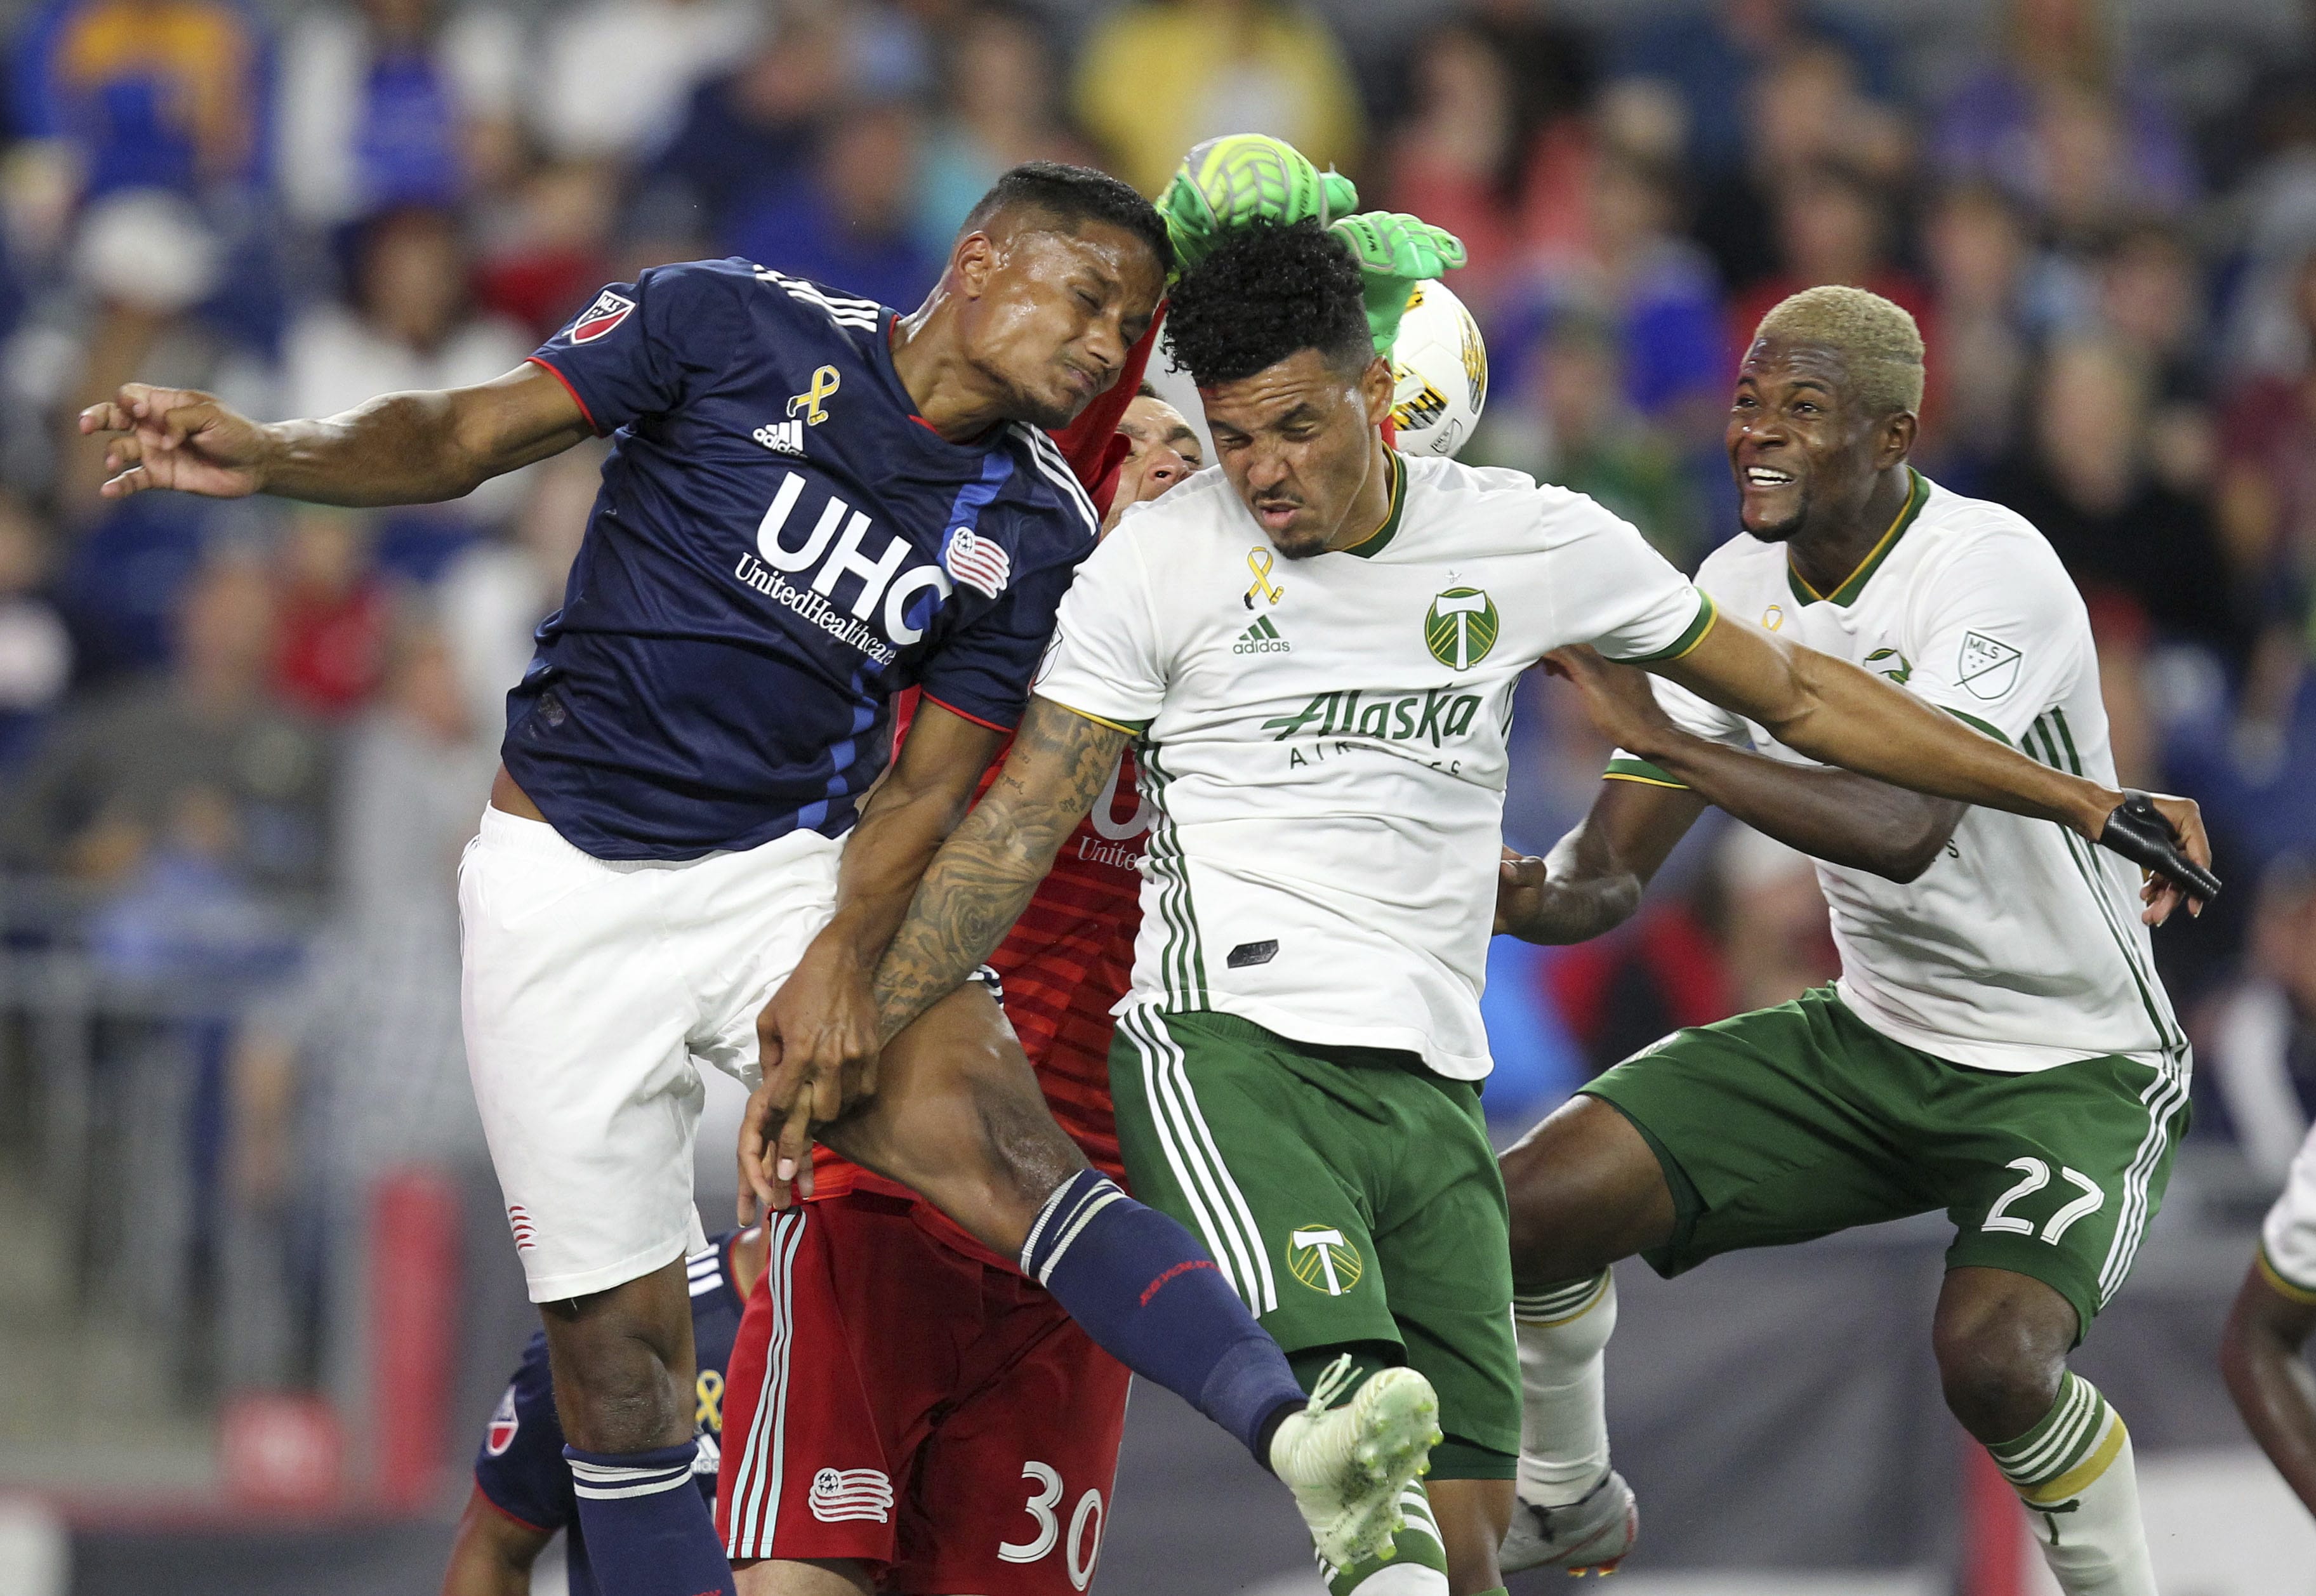 New England Revolution defender Michael Mancienne, left and New England Revolution goalkeeper Matt Turner (30) defend a corner kick as Portland Timbers defender Julio Cascante, second left, and midfielder Dairon Asprilla (27) attack during the second half of an MLS soccer match in Foxborough, Mass., Saturday, Sept. 1, 2018.